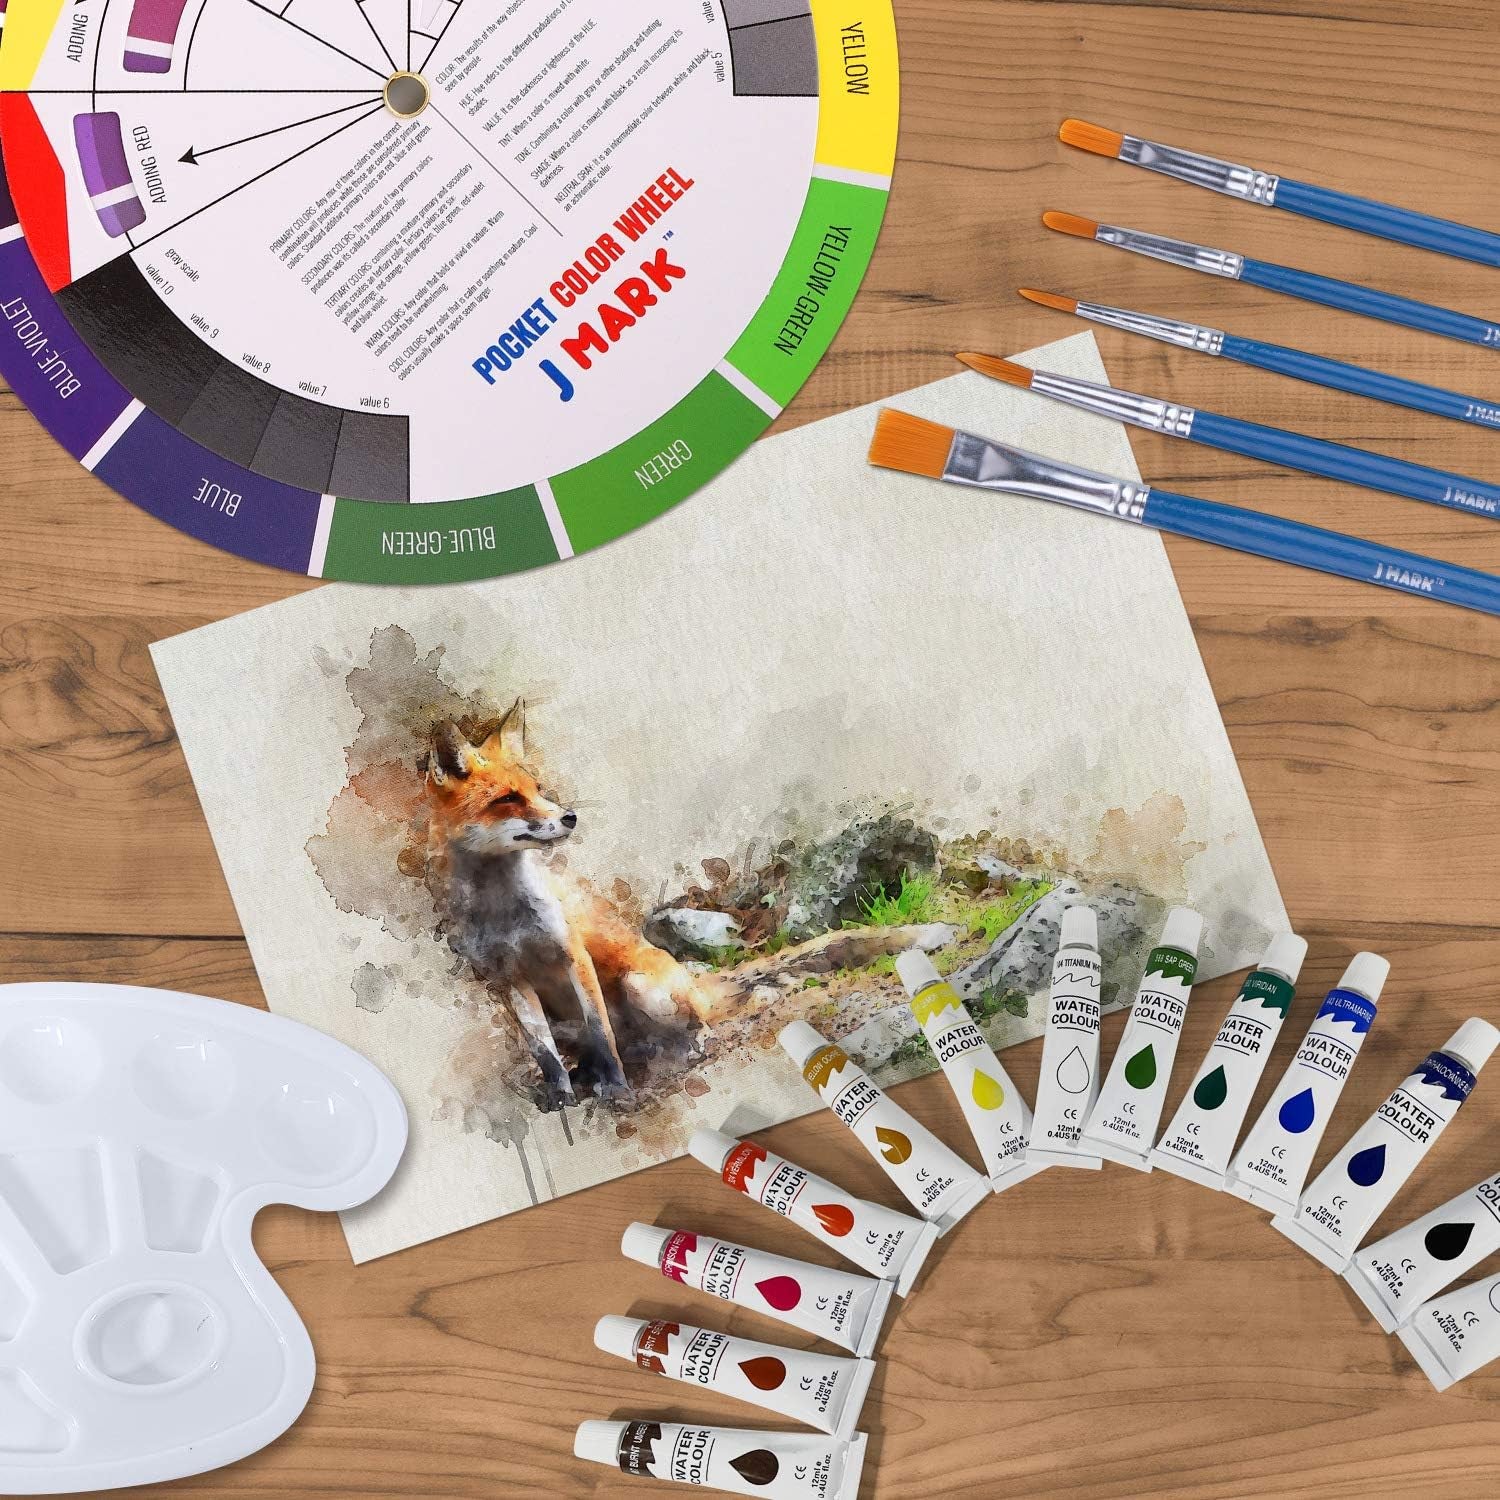 Acrylic & Watercolor Painting Kit – Complete Painting Set with Watercolor Kit, Acrylic & Watercolor Paint Tubes, Wood Easel, Watercolor Paper, Canvas Painting Kit & More